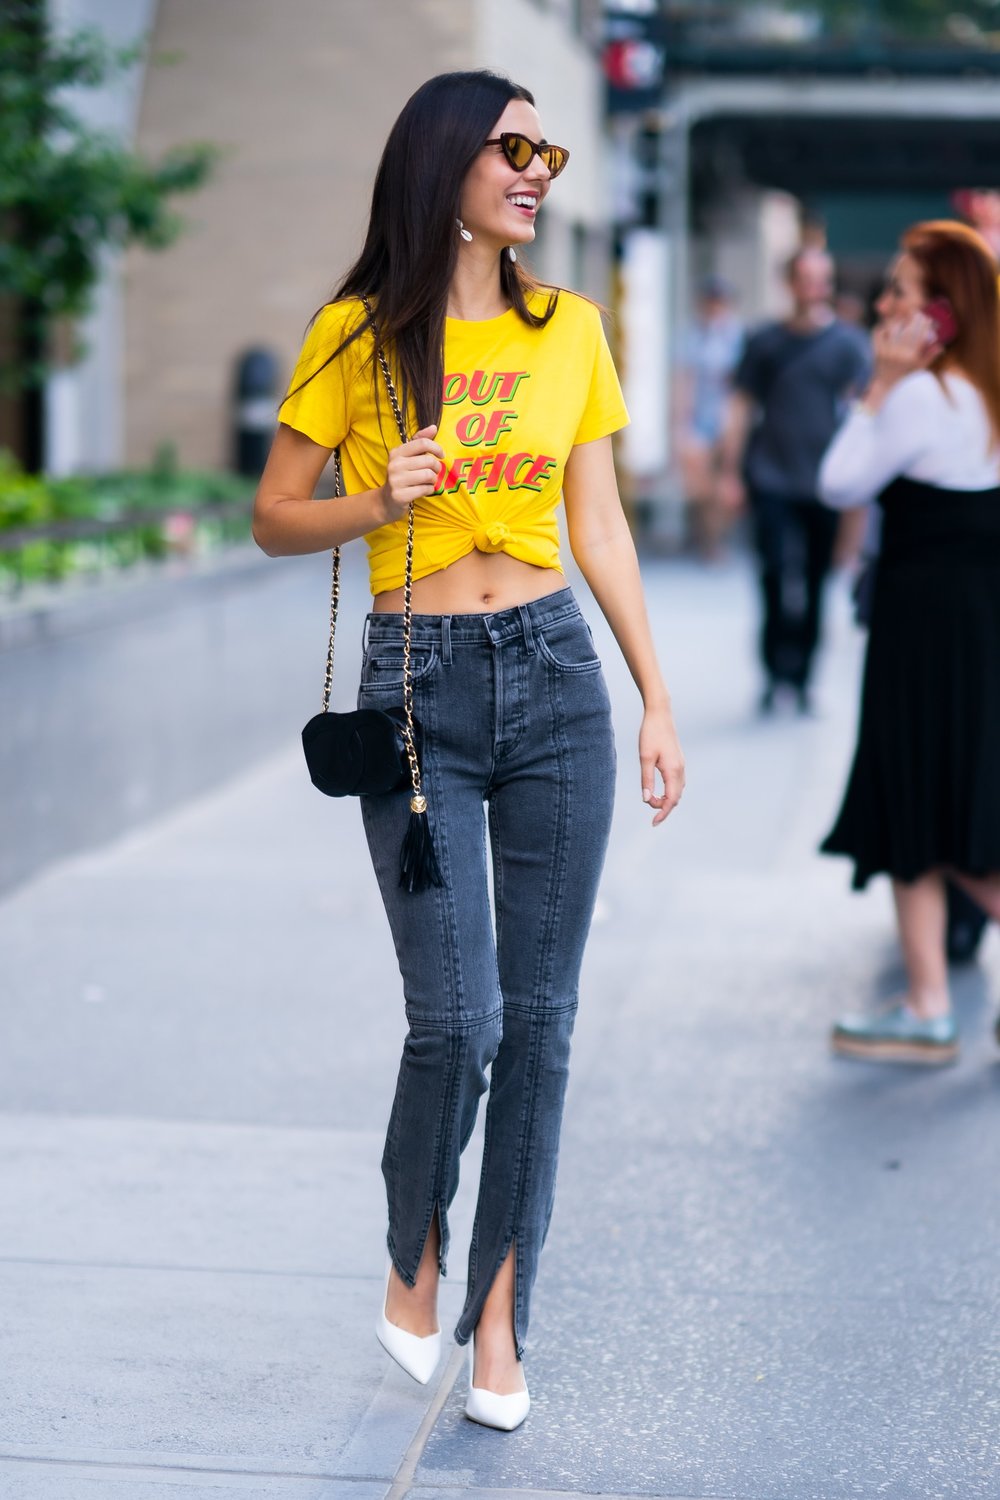 victoria-justice-psc-yellow-tee-in-new-york-city.jpg